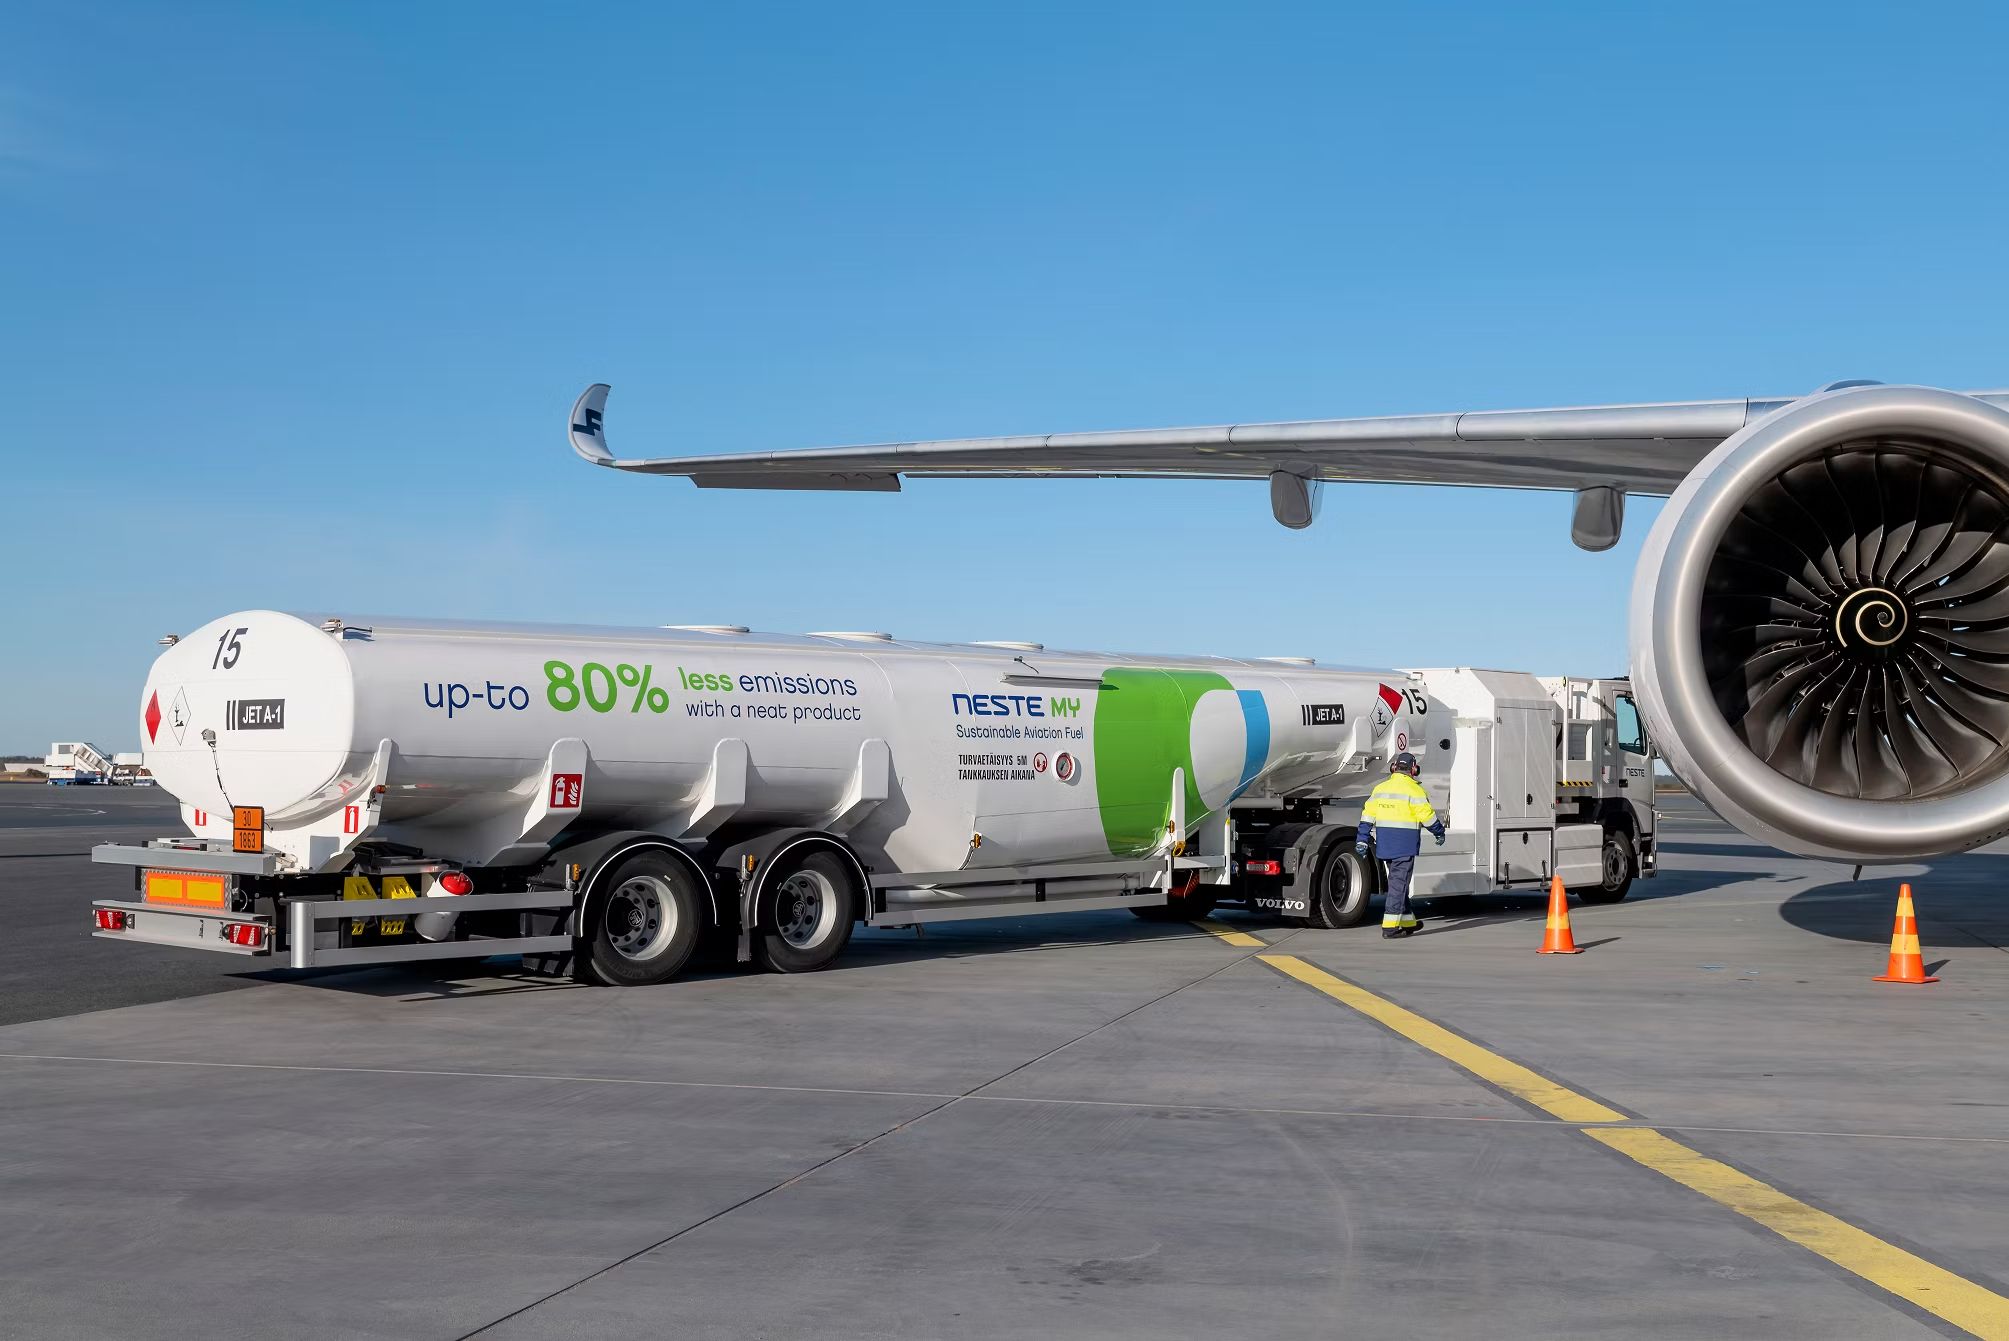 A Neste Sustainable Aviation Fuel Tanker parked next to an aircraft.